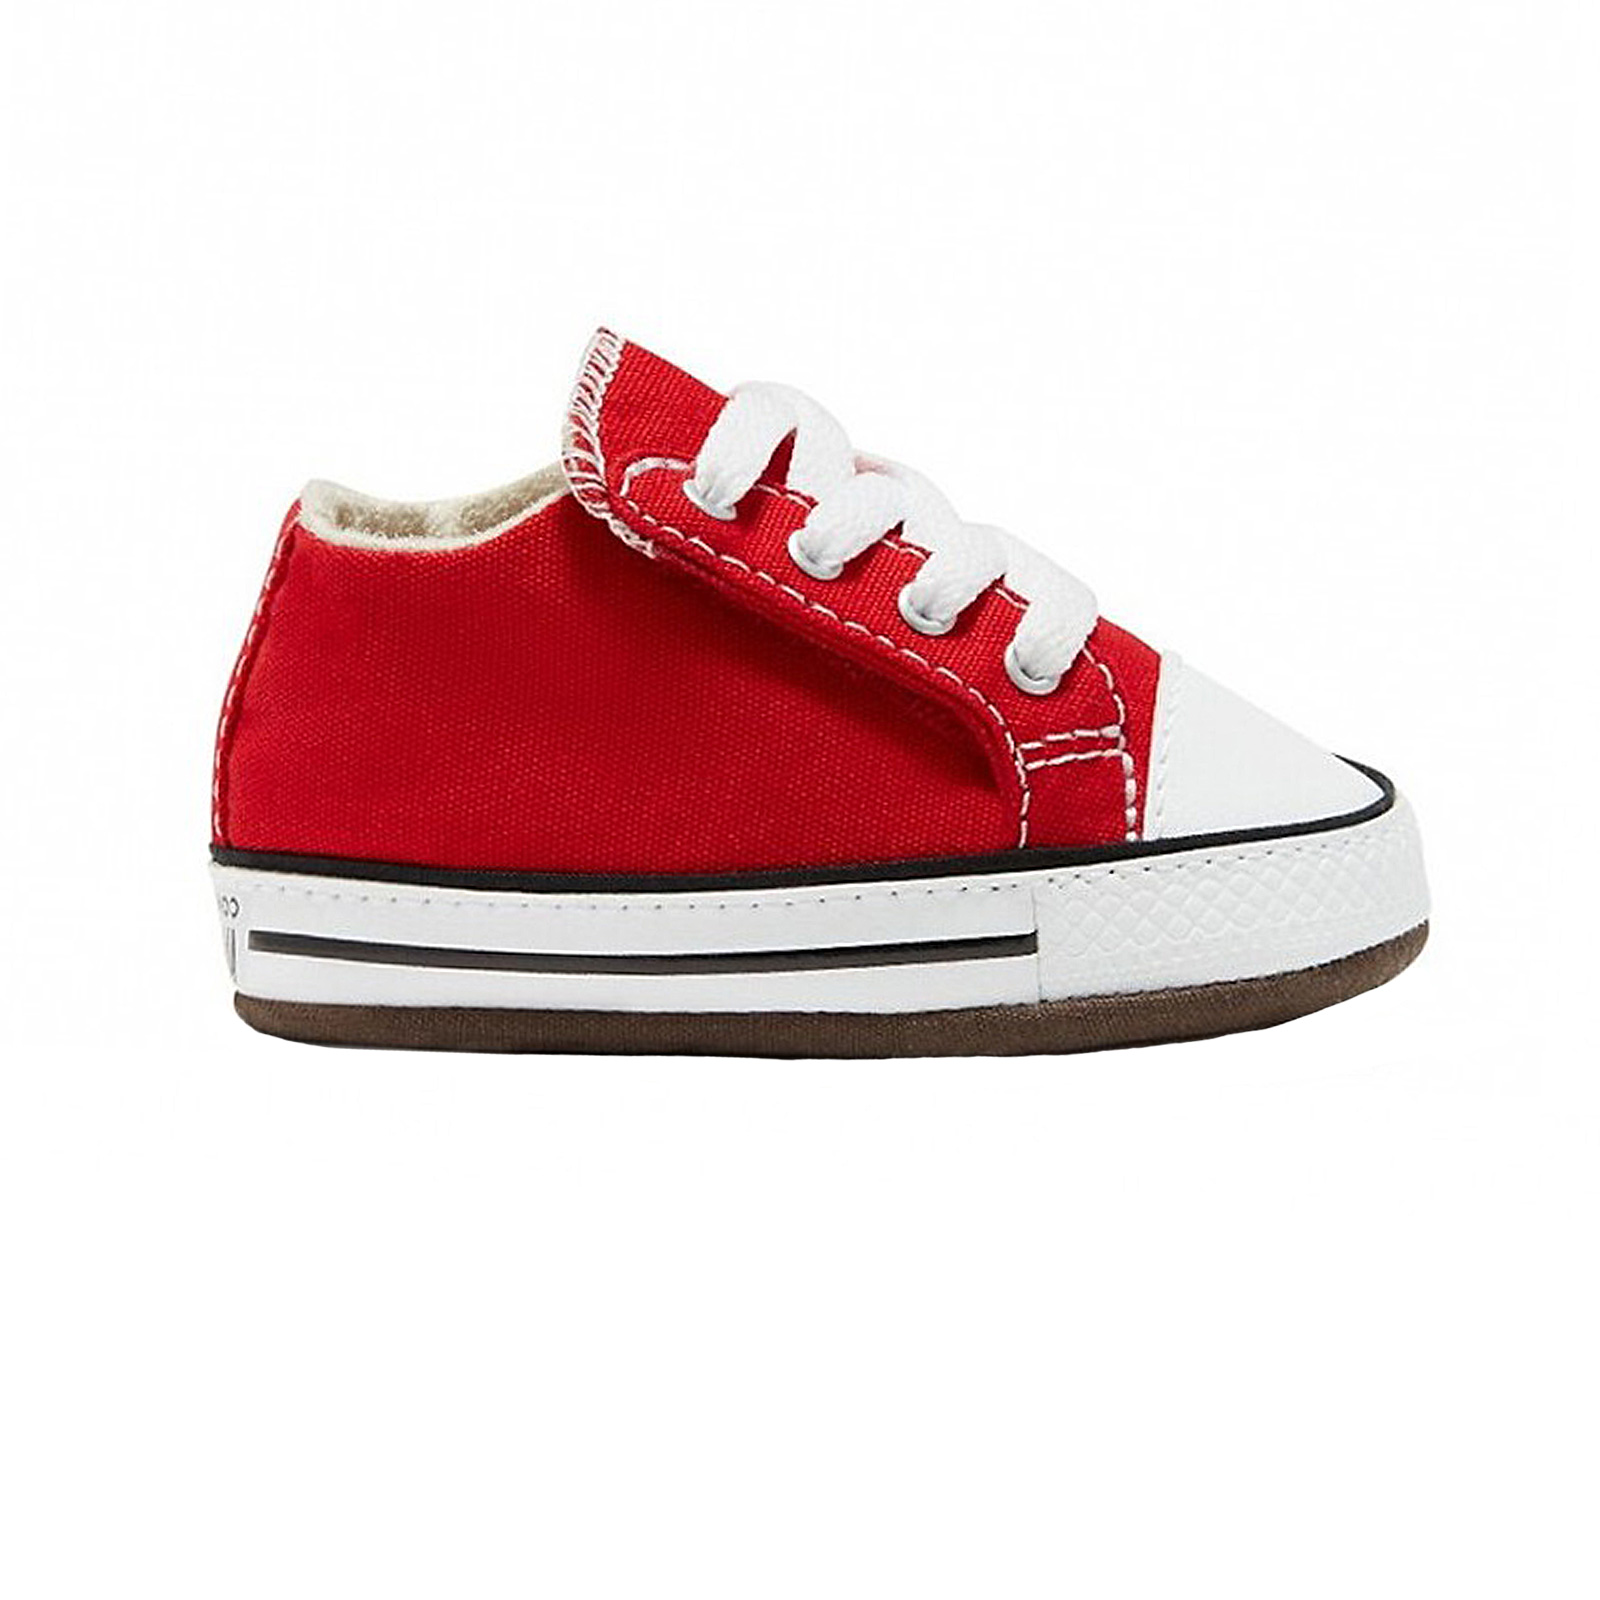 Converse - CHUCK TAYLOR ALL STAR CRIBSTER - 610-UNIVERSITY RED/NATURAL IVORY Παιδικά > Παπούτσια > Sneaker > Παπούτσι Low Cut